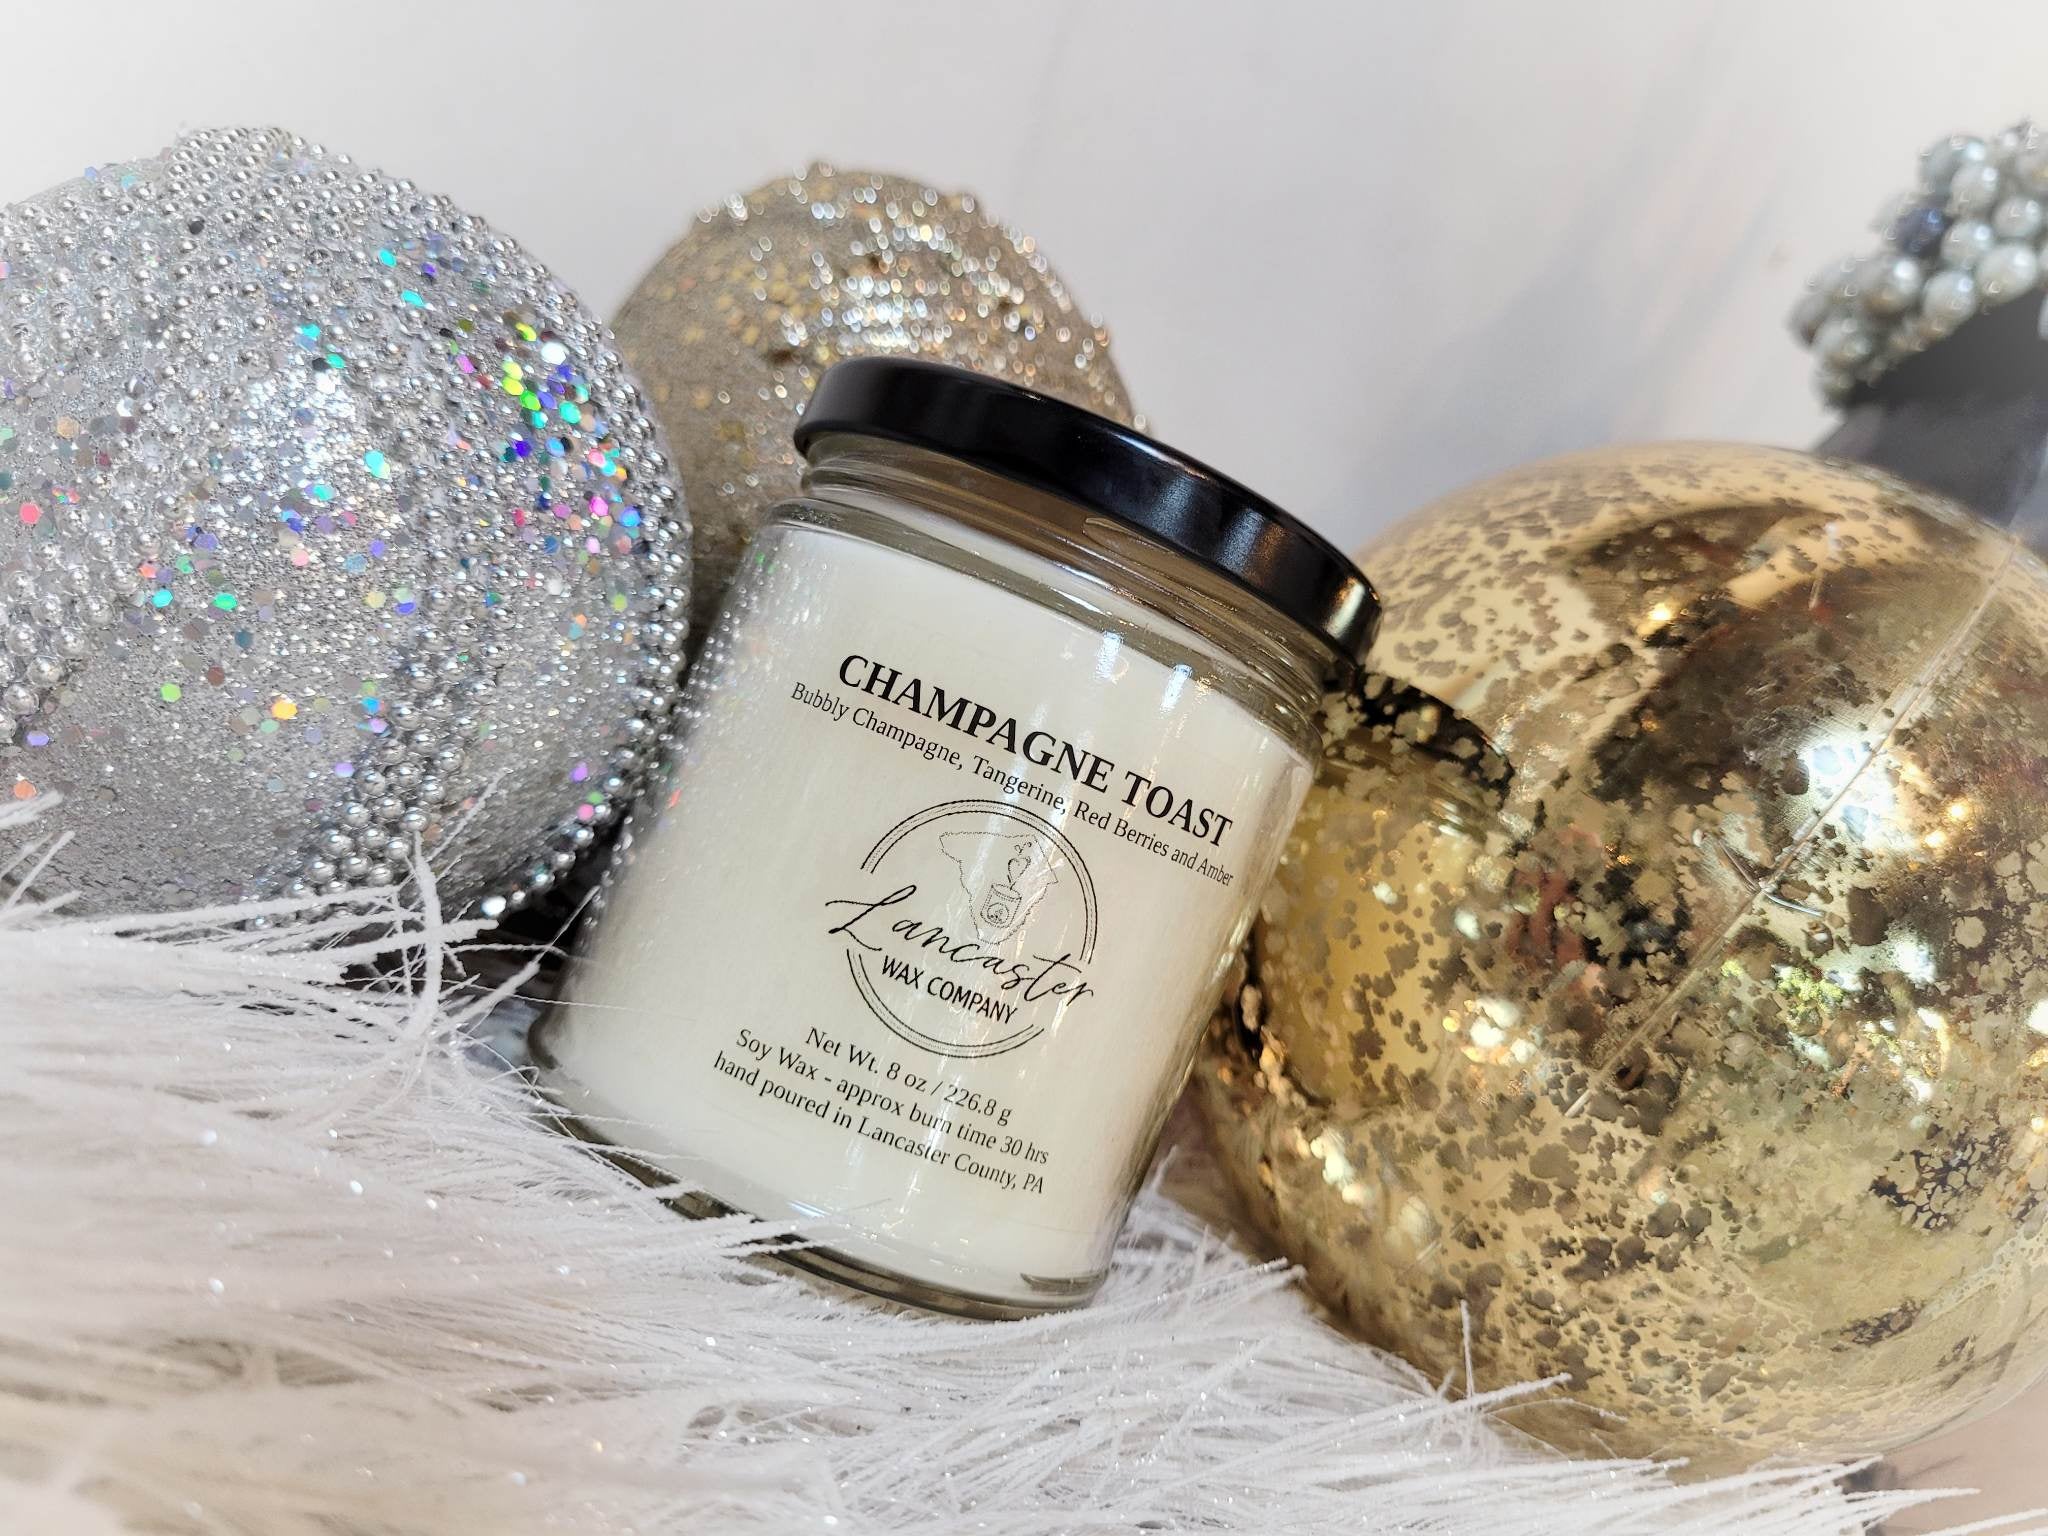 CANDLE SPOTLIGHT: Champagne Toast